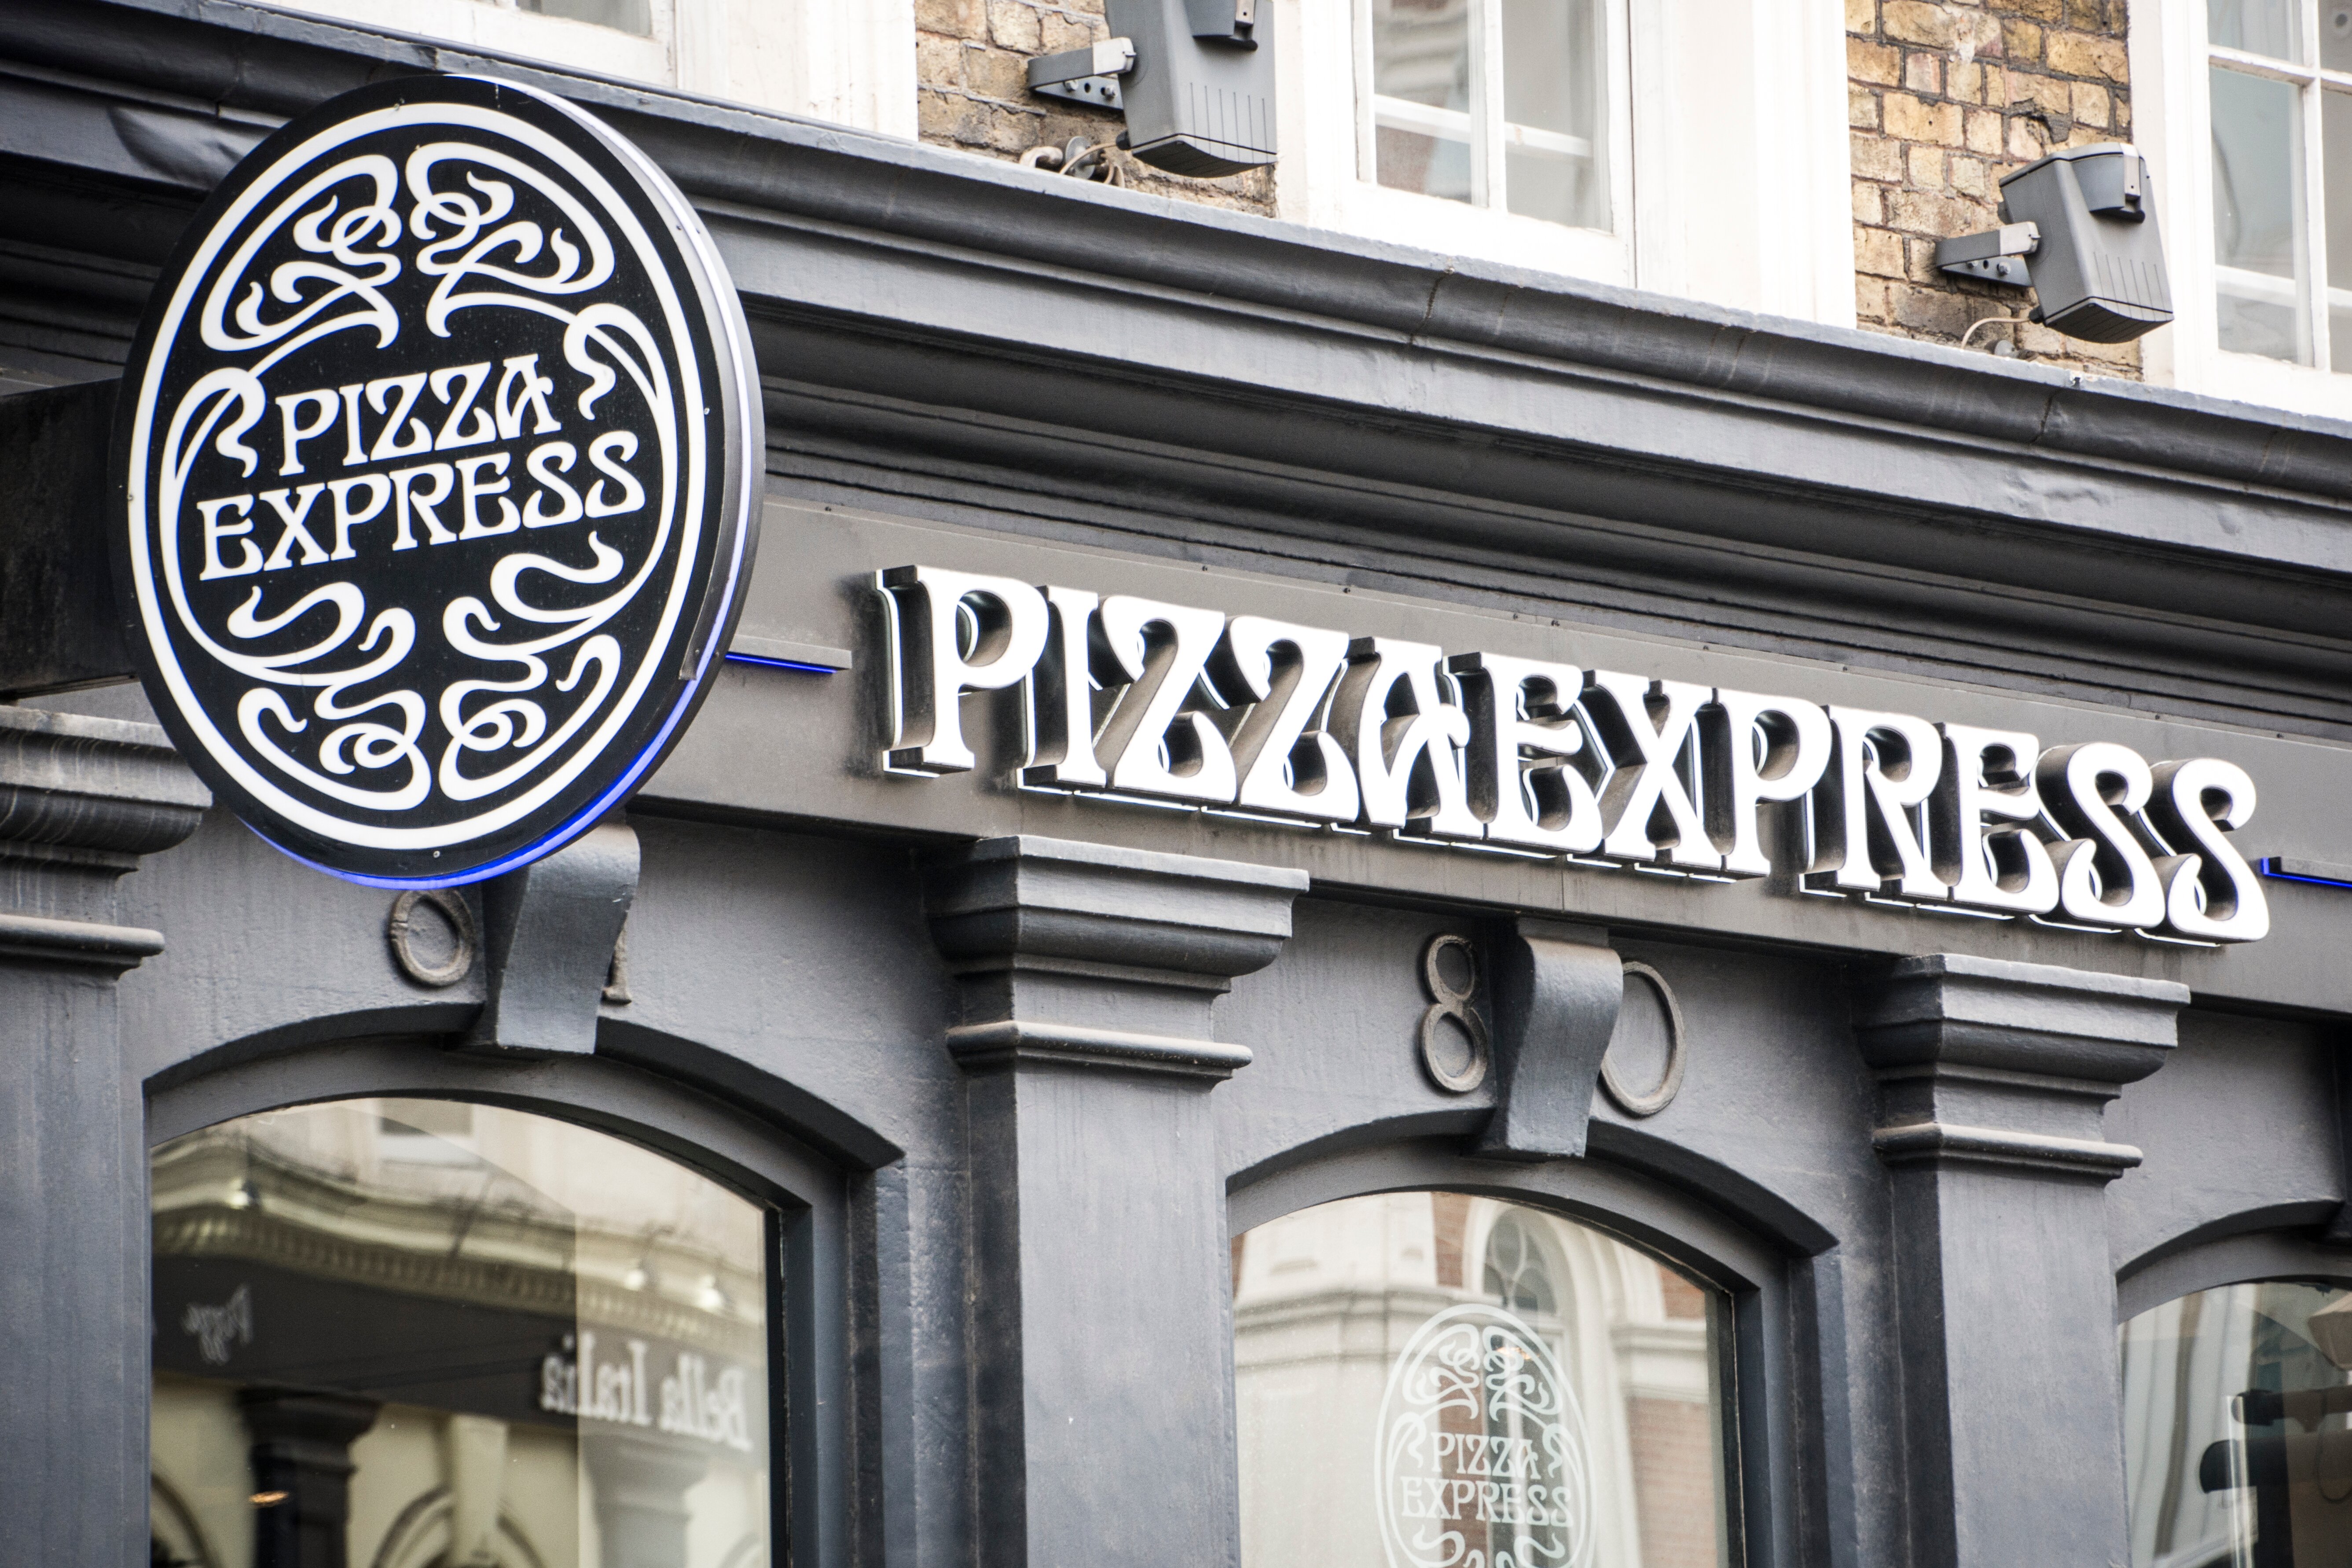 PizzaExpress owner will not make rival bid for the Restaurant Group